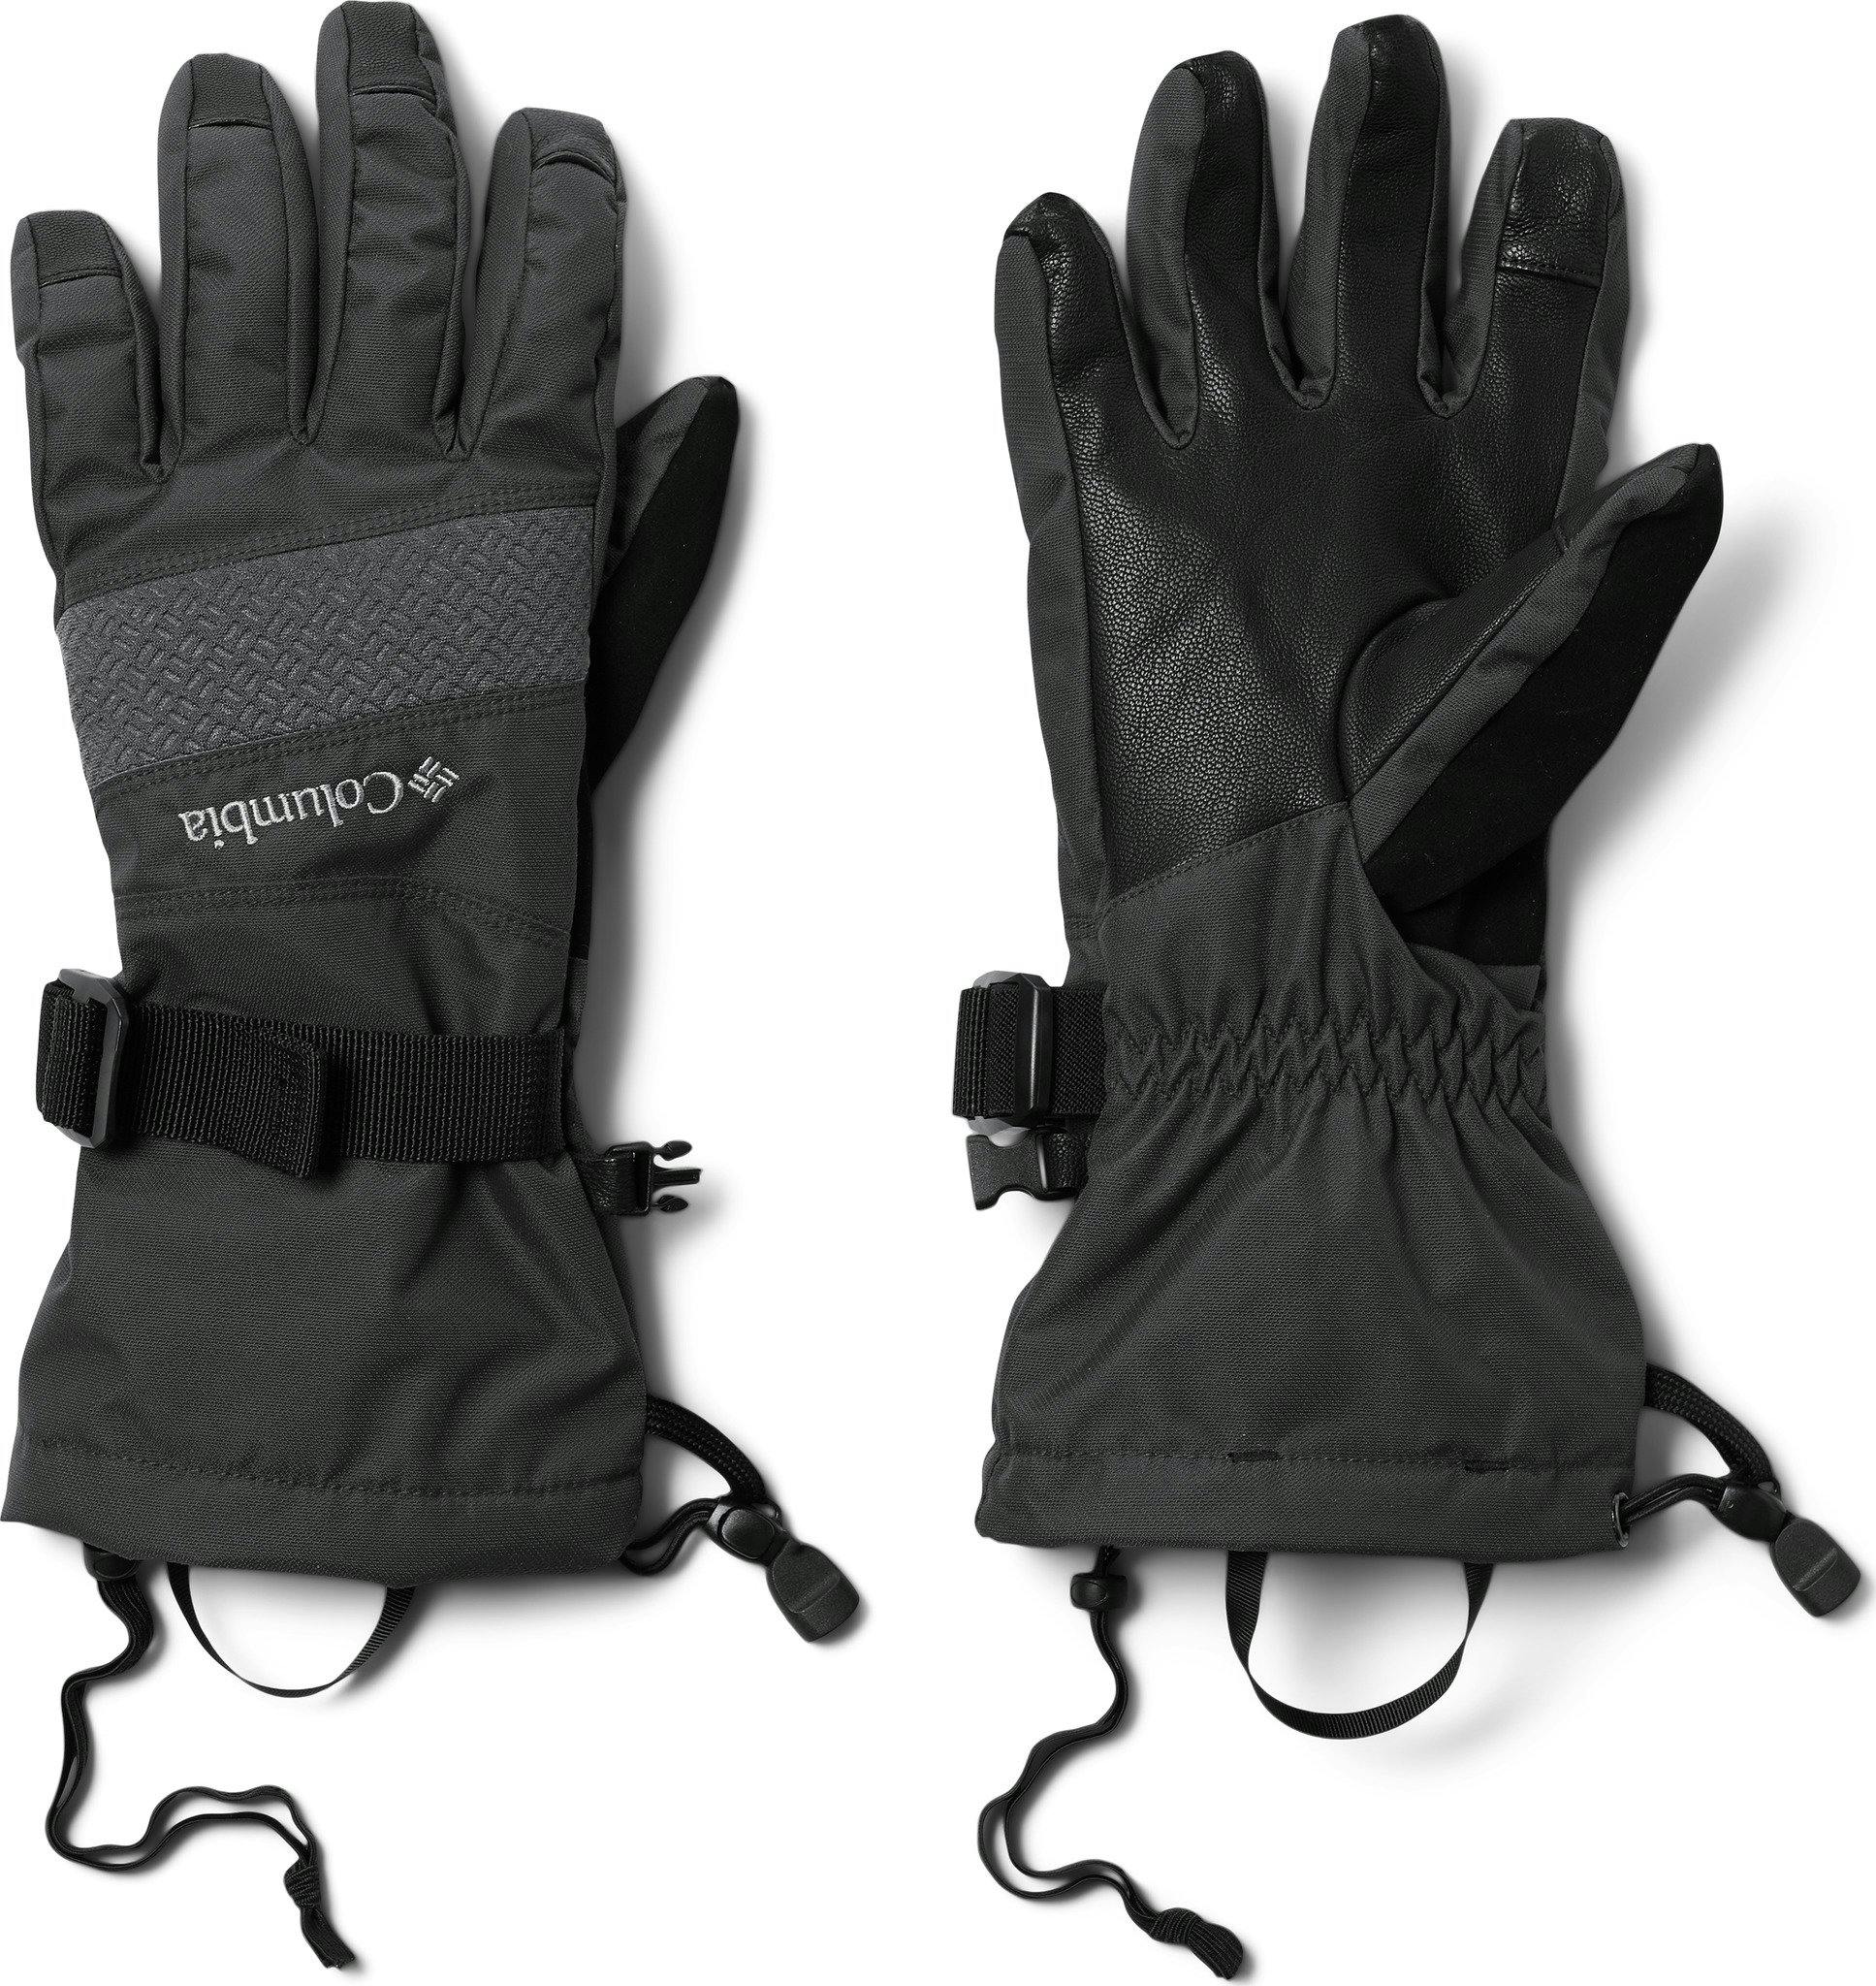 Product image for Whirlibird II Gloves - Women's